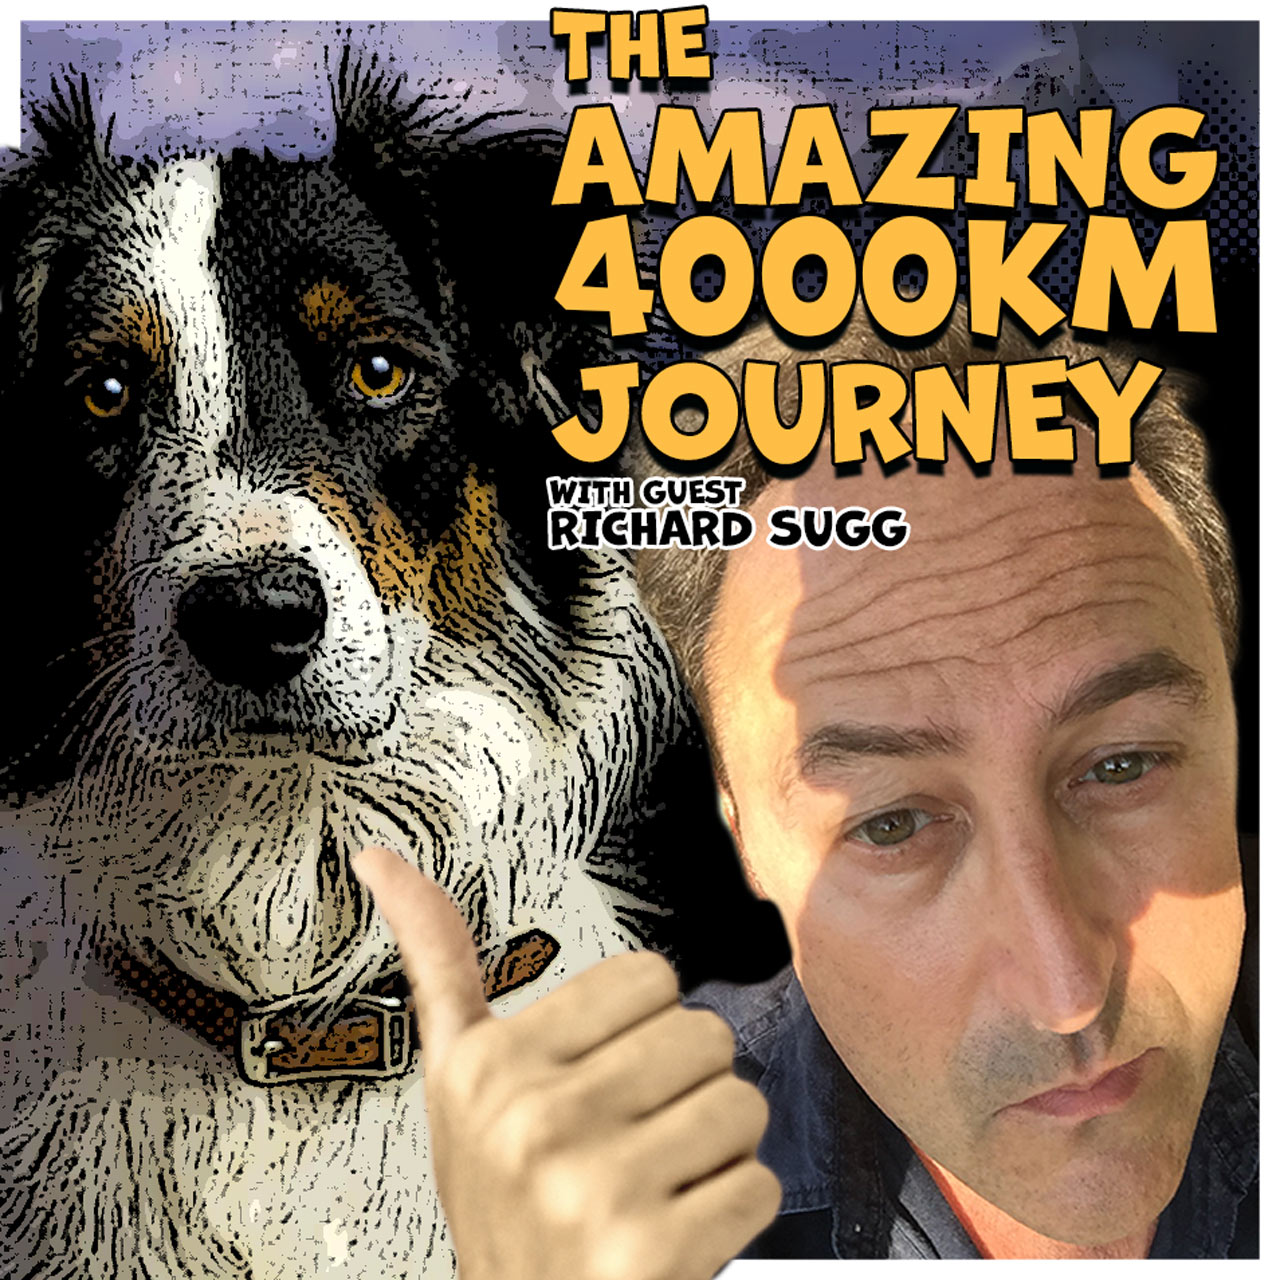 Psychic Abilities in Animals \\ Bobbie the Wonder Dog with guest Richard Sugg